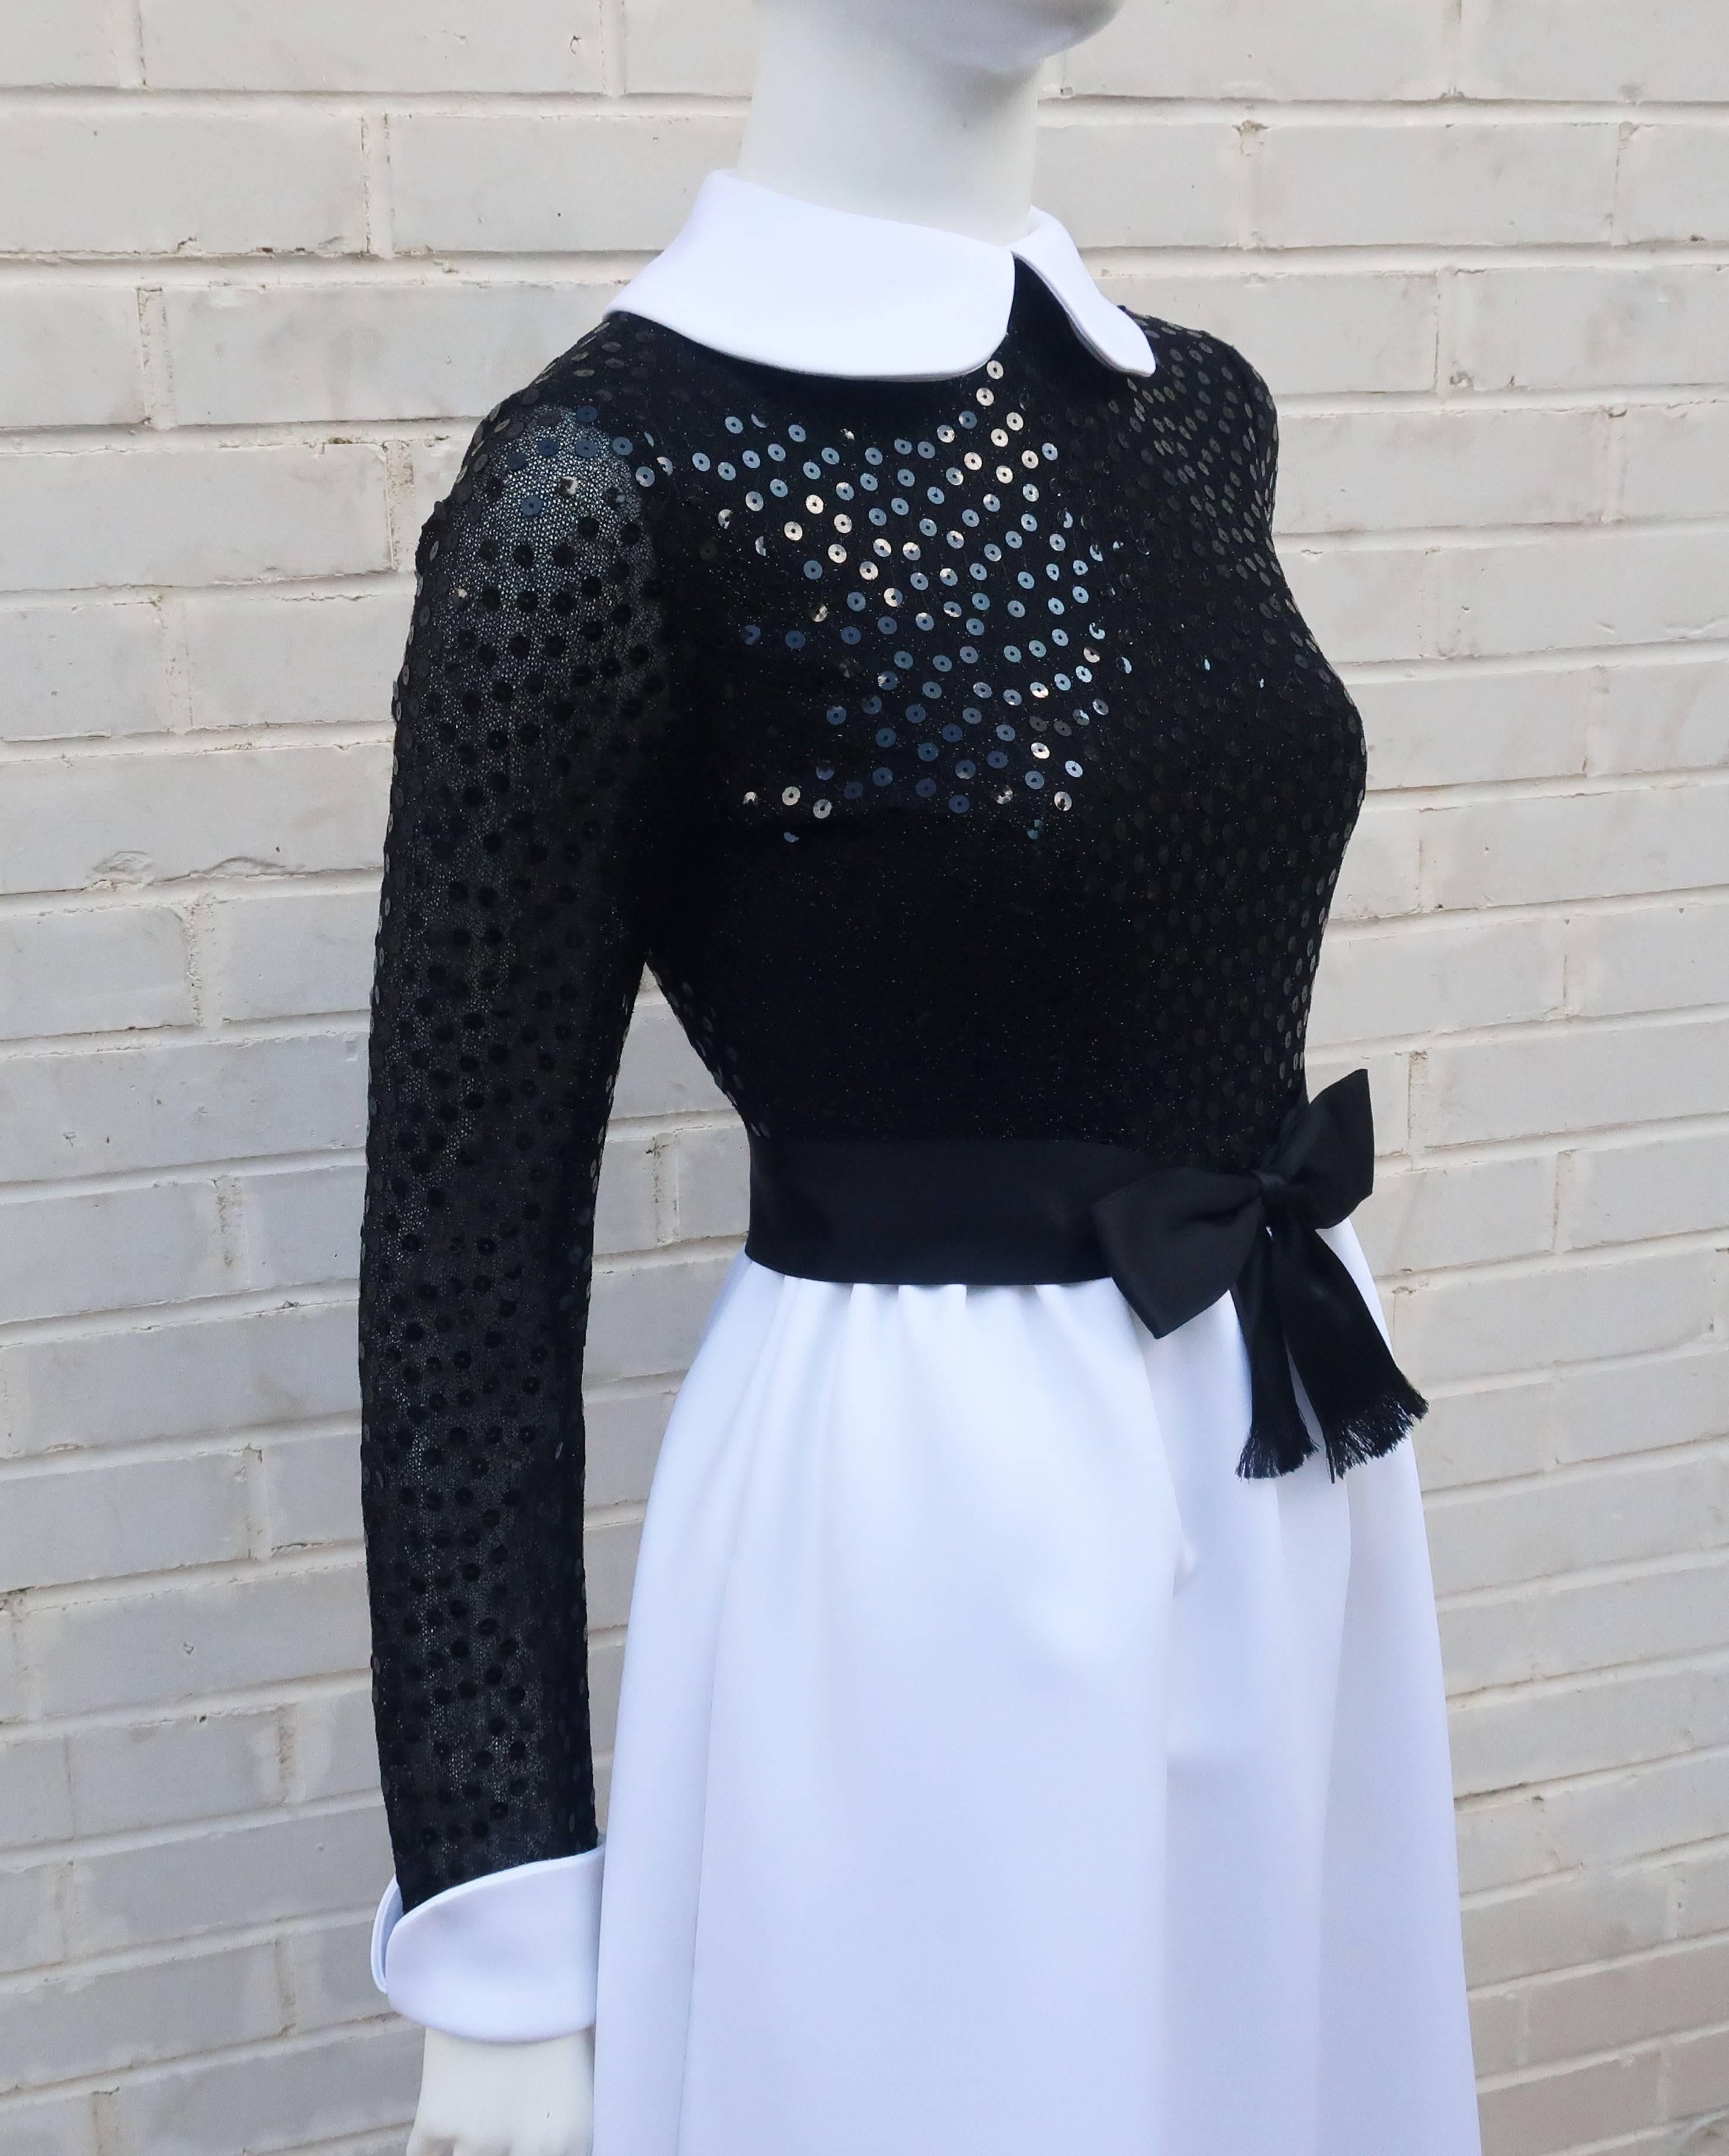 Delightfully demure with a good dose of style and sophistication ... all hallmarks of this 1970's Mollie Parnis evening gown.  The dress zips and hooks at the back with a built-in black satin bow belt and Peter Pan collar.  The bodice is a black